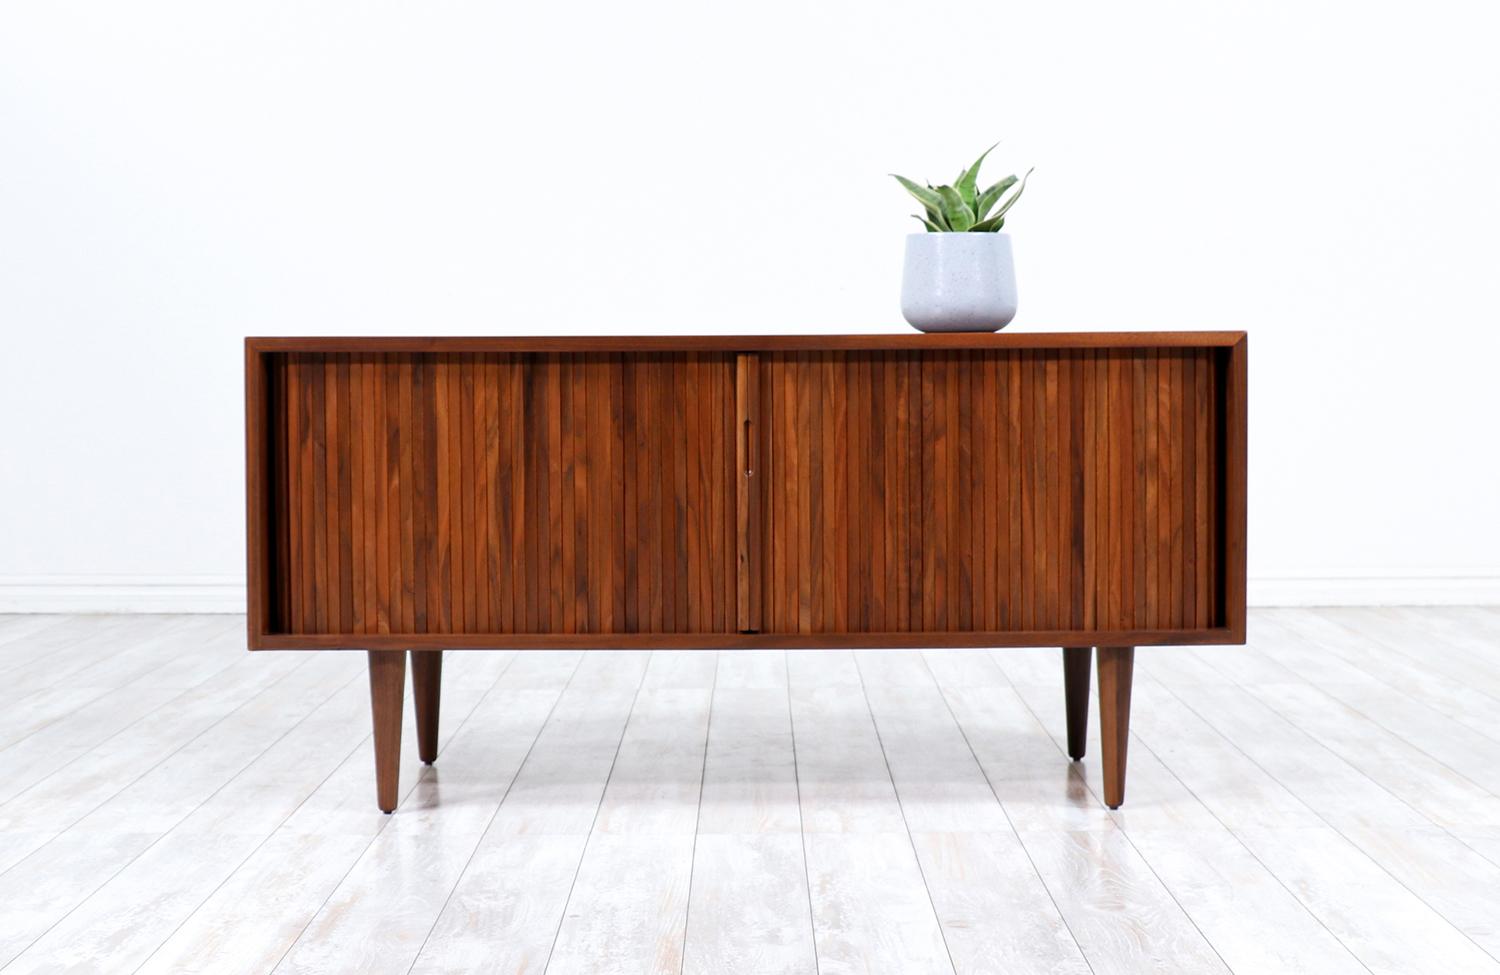 Compact tambour-door credenza designed by Milo Baughman for Glenn of California in the United States circa 1950’s. Impeccably crafted with walnut wood and newly refinished by our skilled craftsmen, this credenza features a tambour doors with